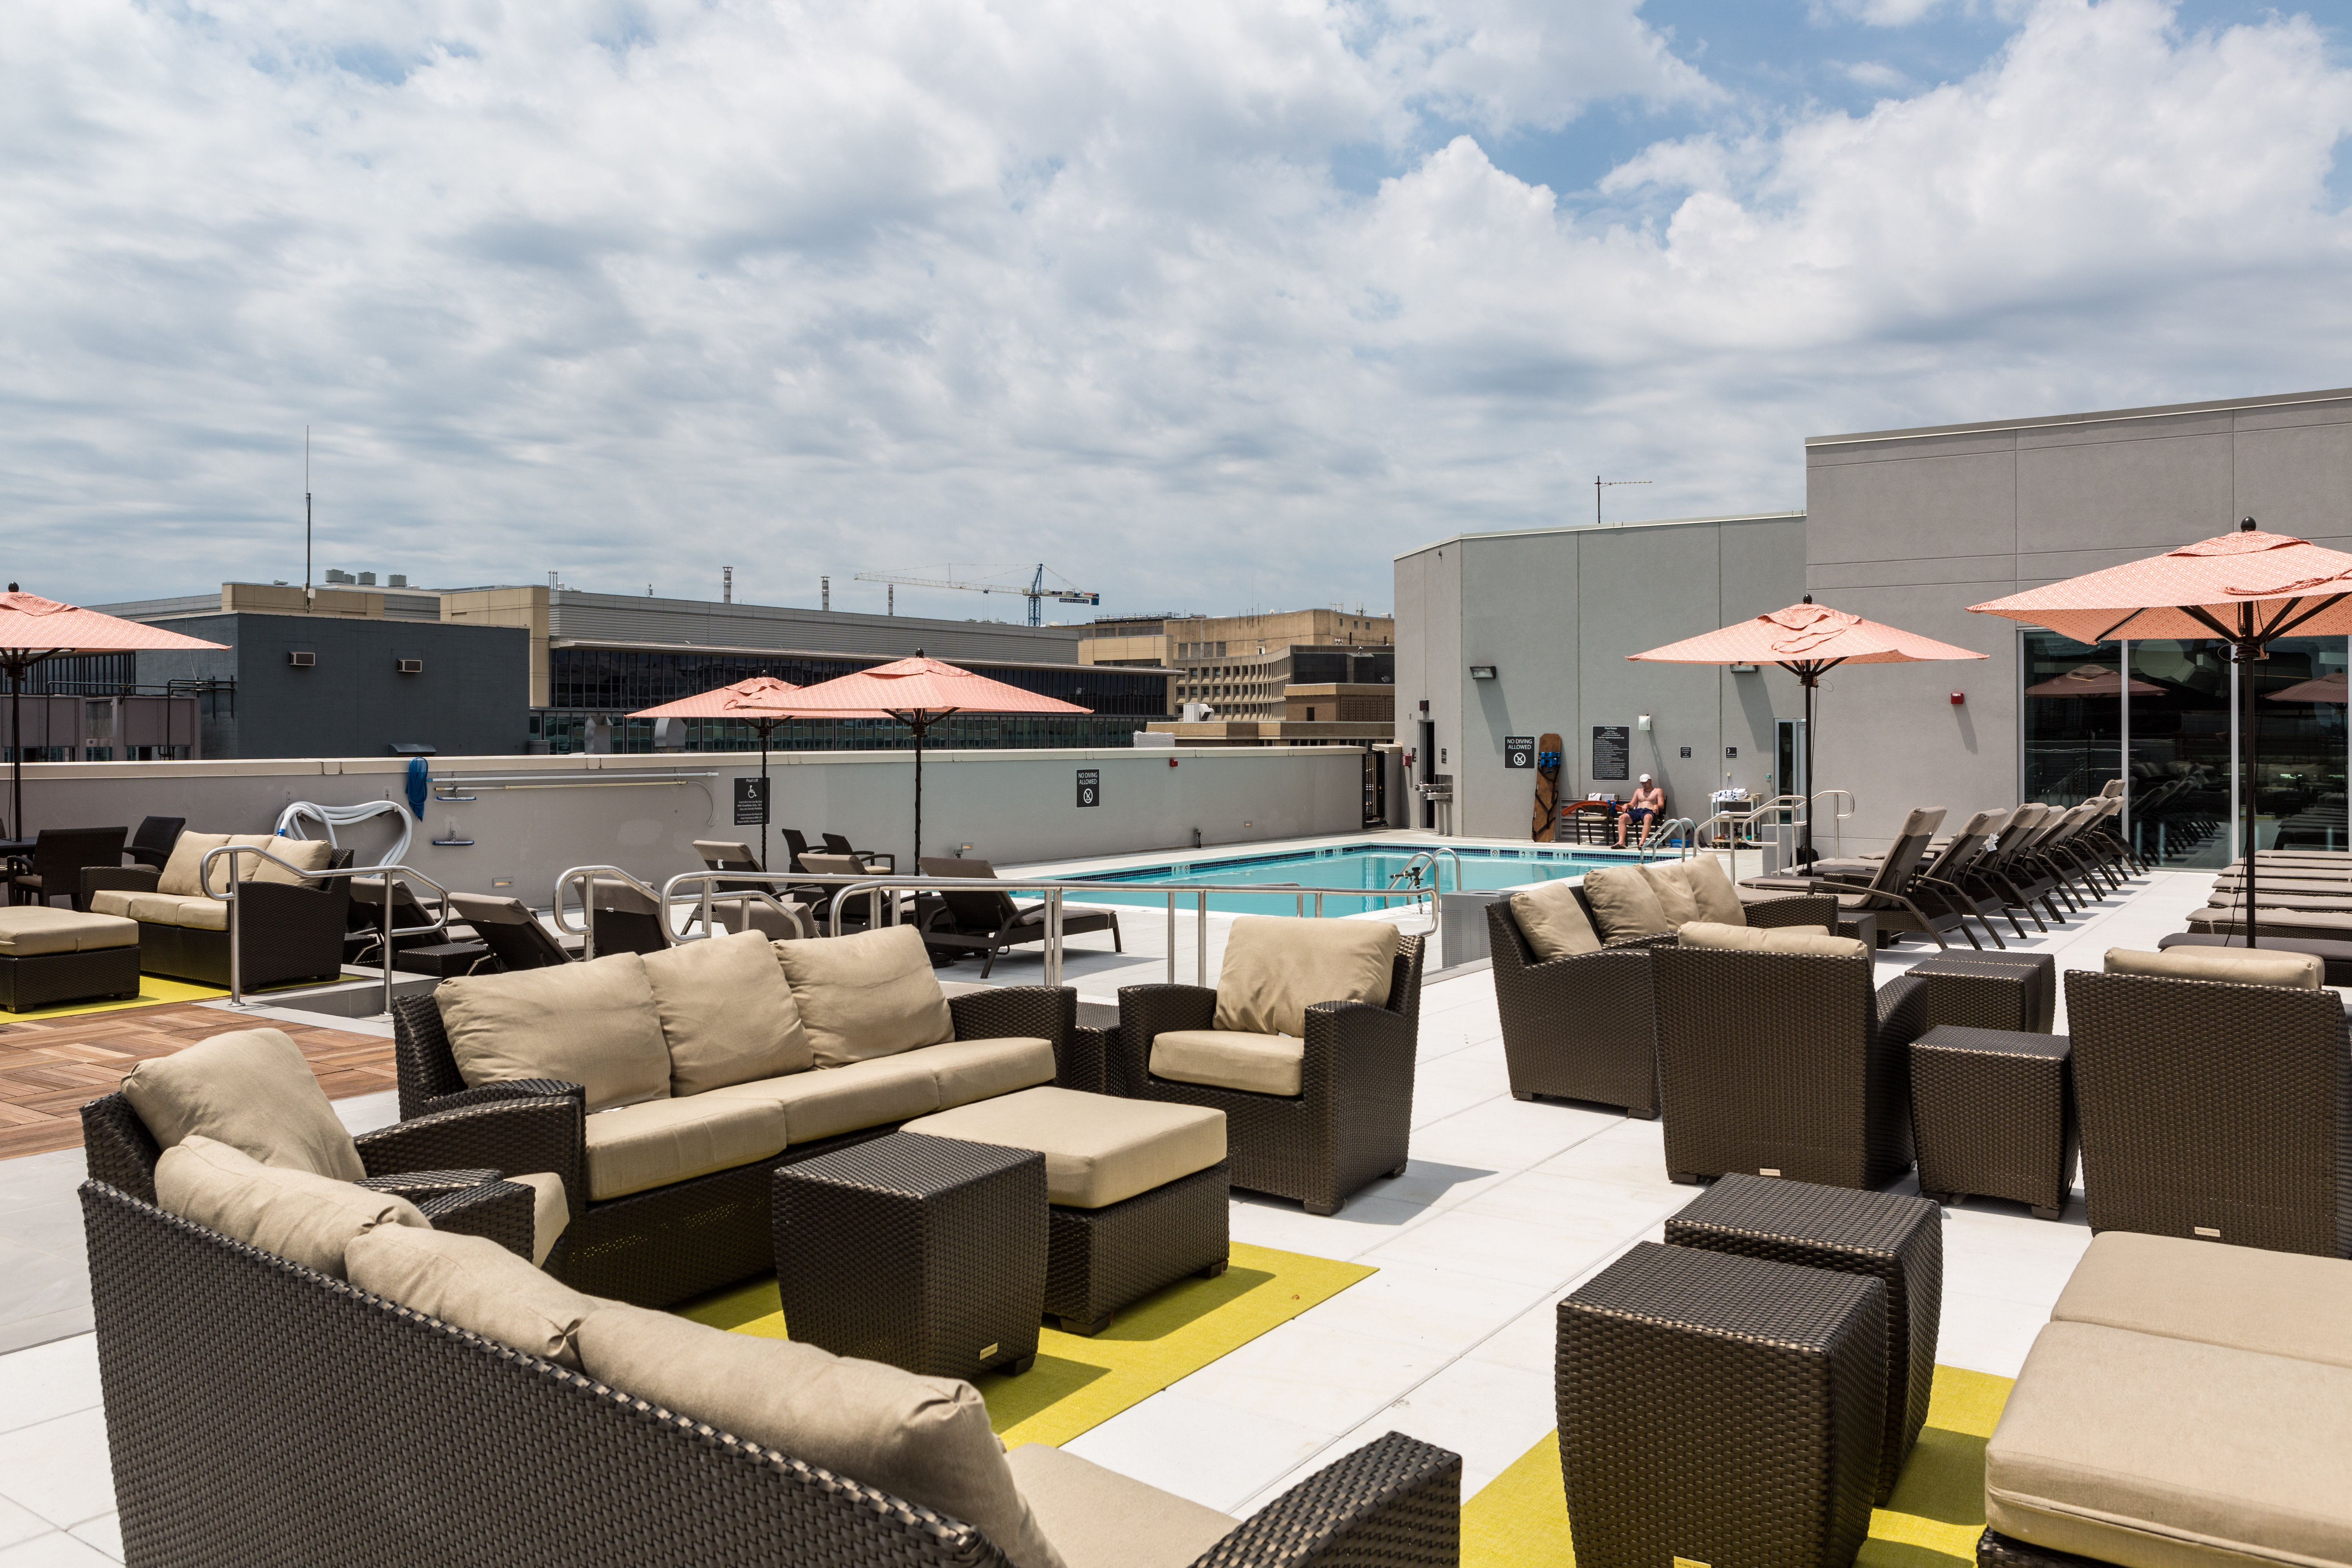 Umbrellas, sofas, chairs, and recliners available on the roof.